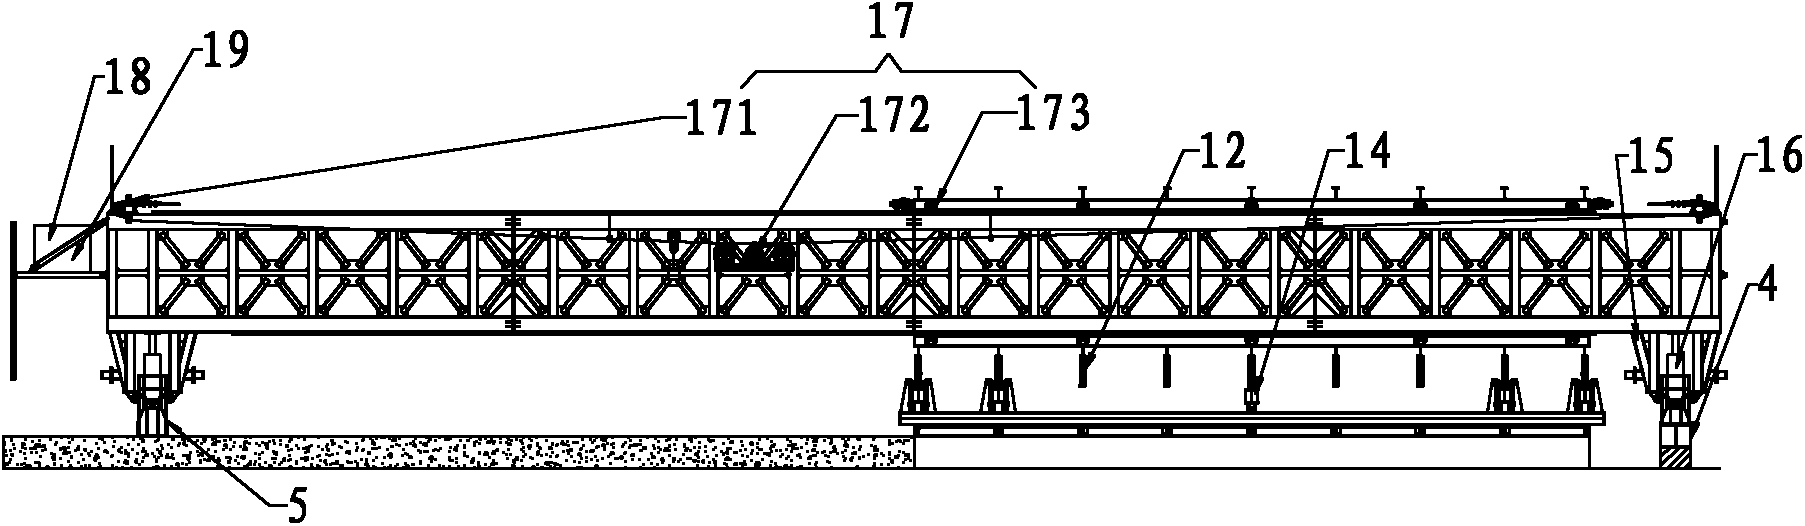 Tunnel bottom concrete side-slipping lining construction method and side-slipping needle beam bottom board trolley